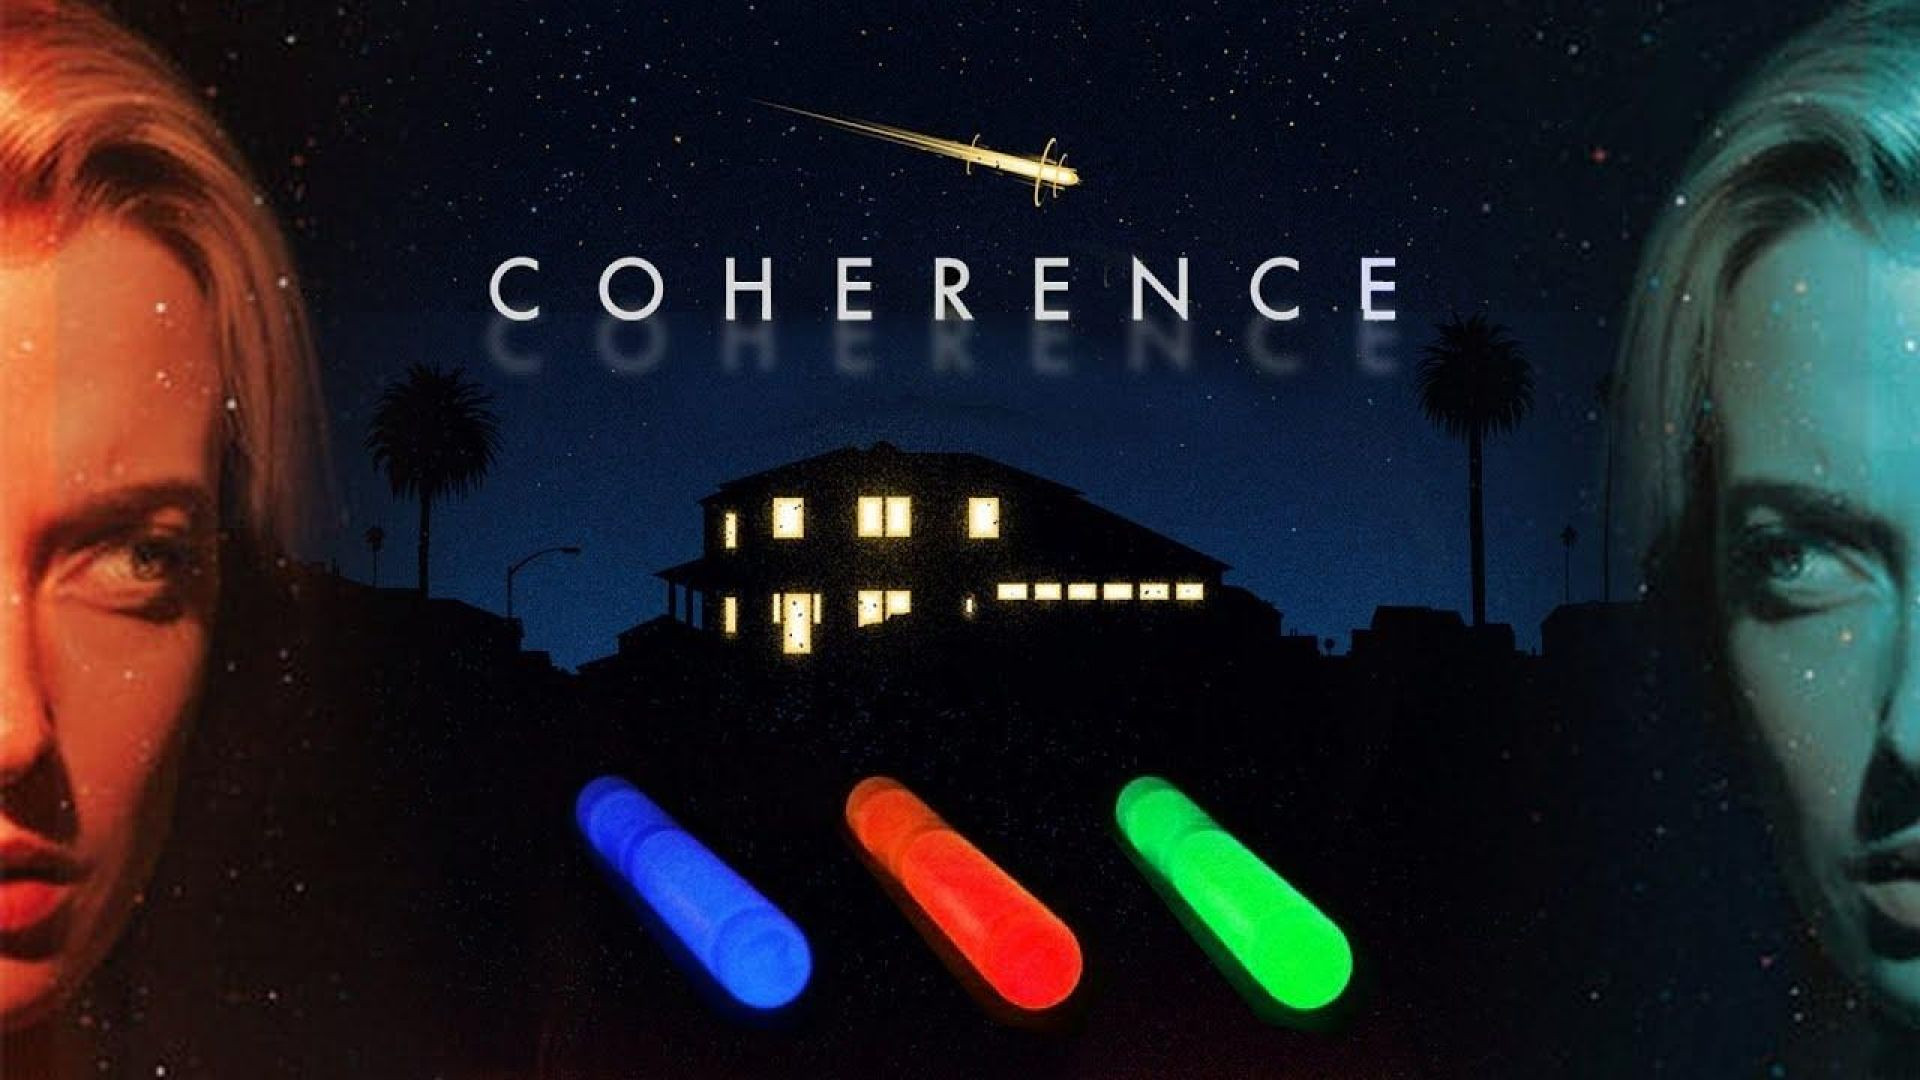 Coherence (2013) cas.